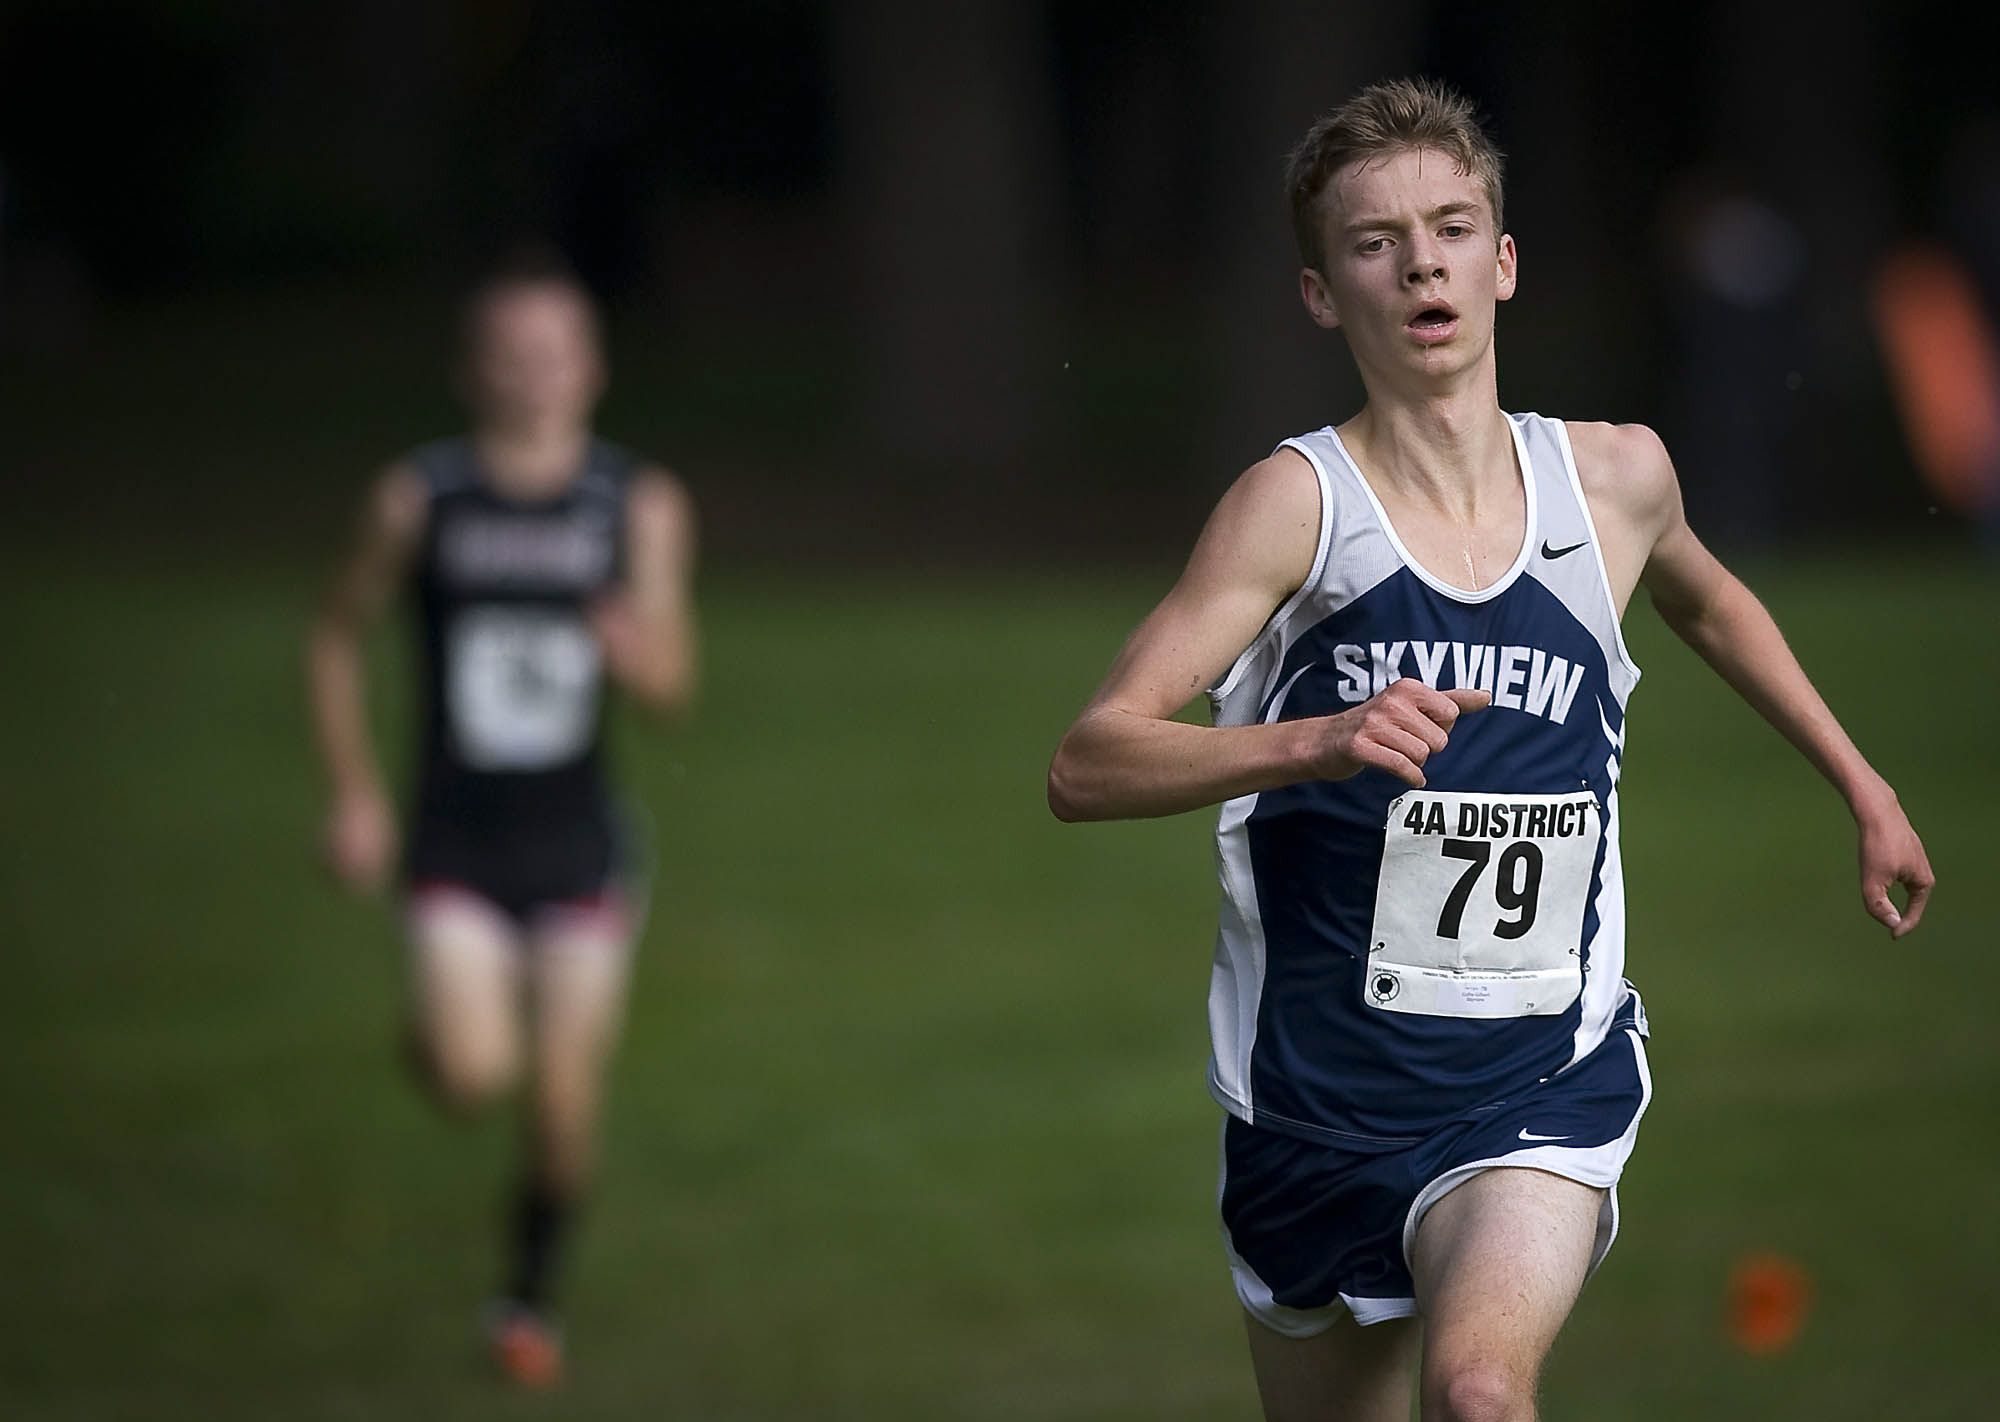 Skyview junior Colby Gilbert made good use of the hills at Lewisville Park, running to a Class 4A district championship.